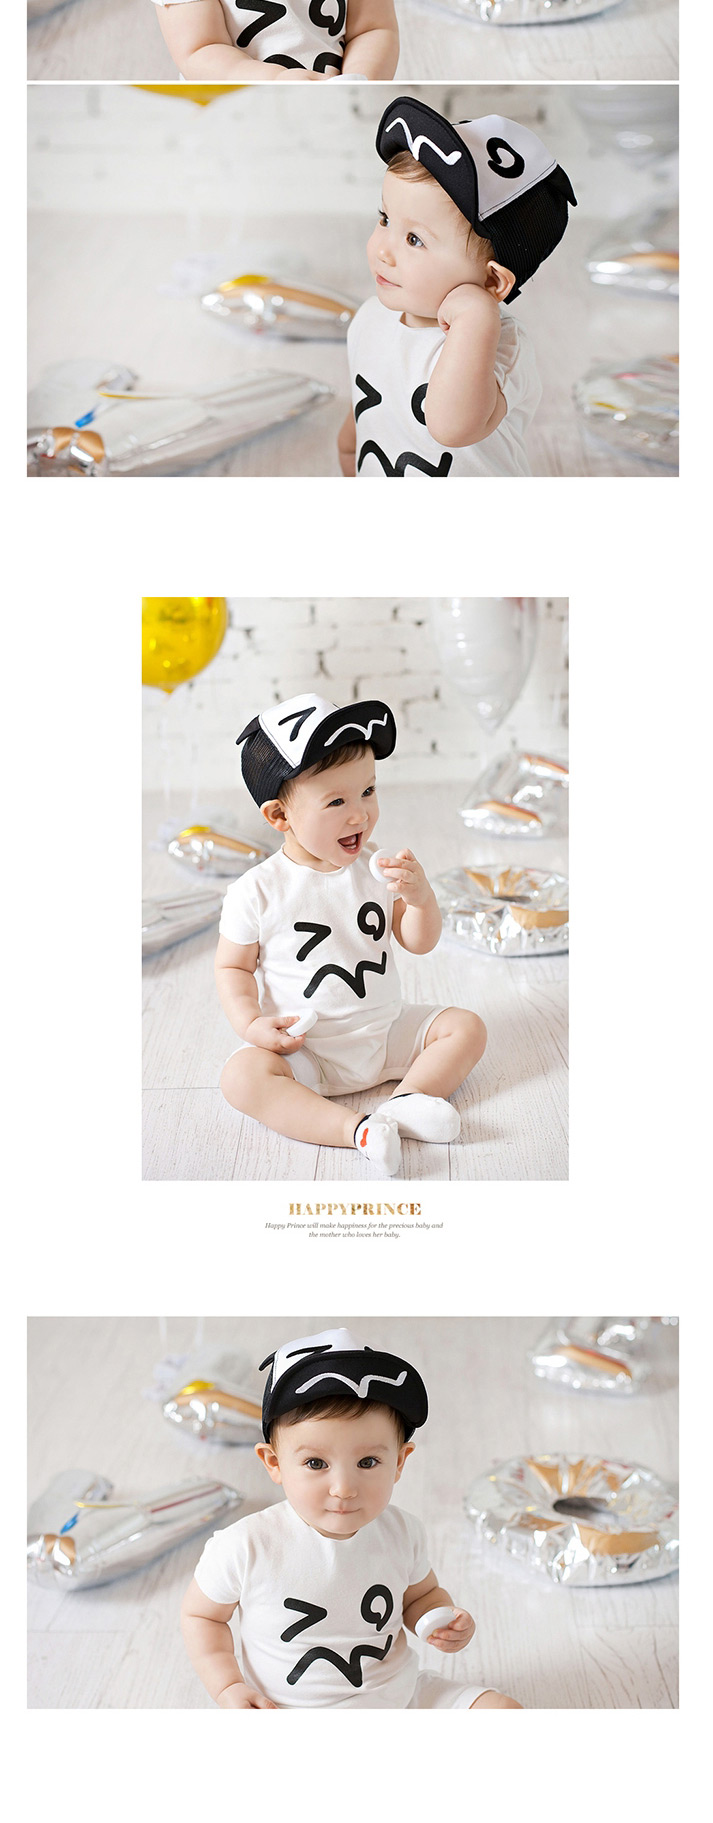 Lovely Black Eye Pattern Decorated Hollow Out Design,Children